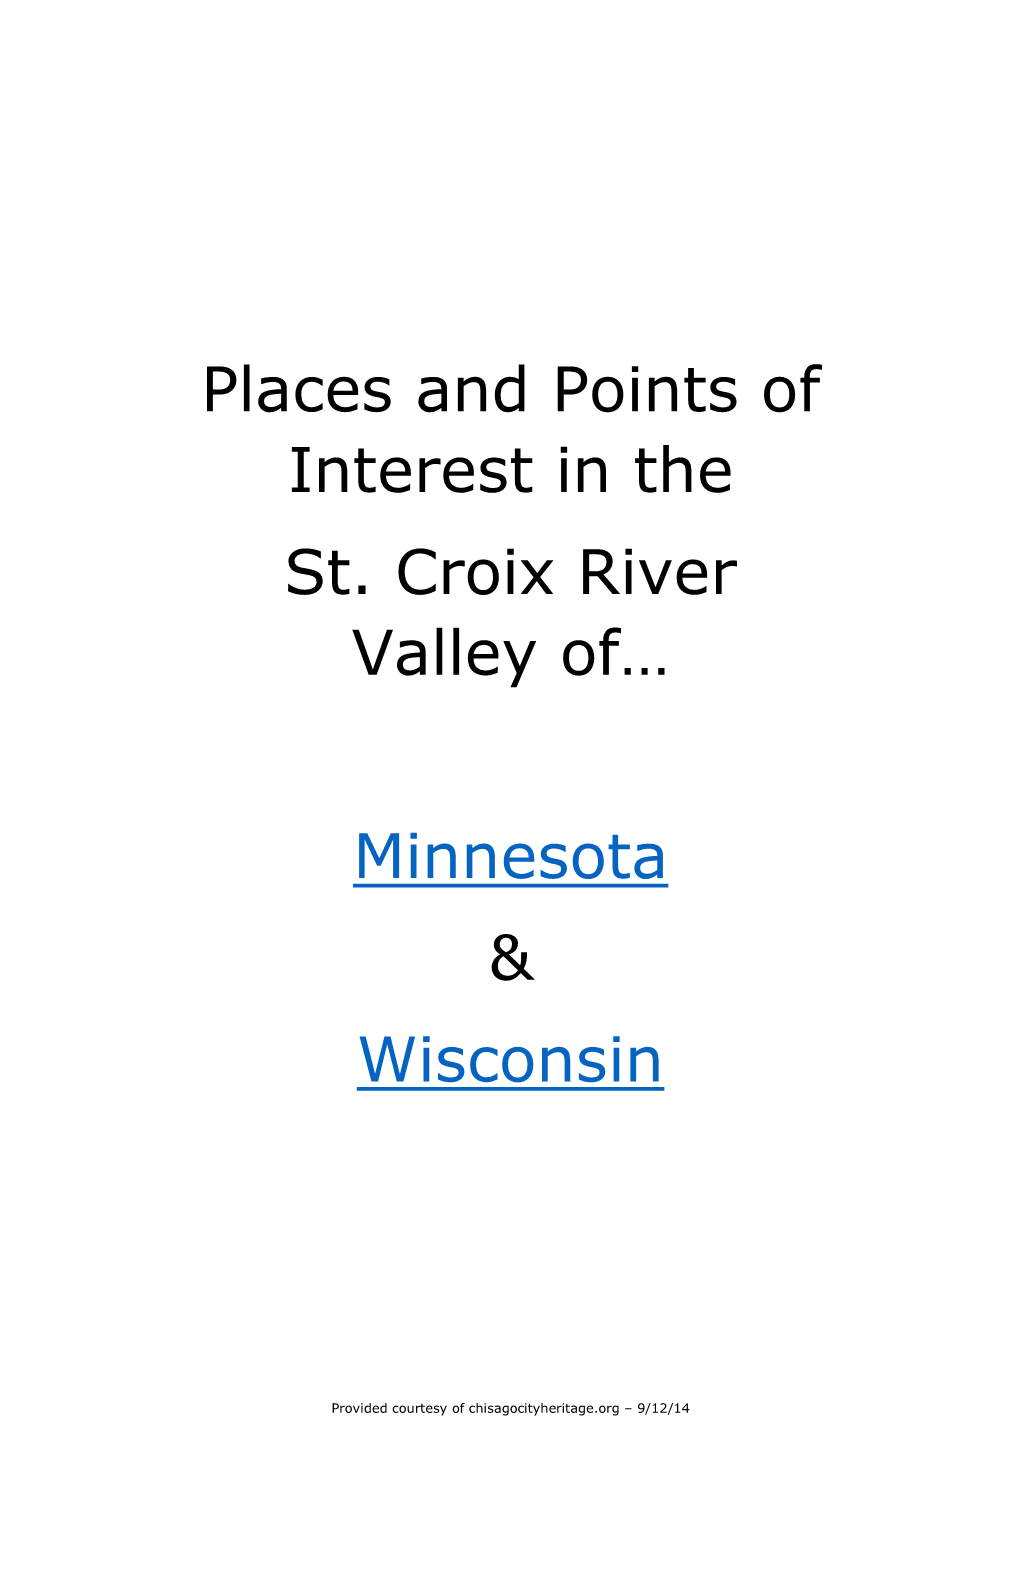 Places and Points of Interest in the St. Croix River Valley Of…